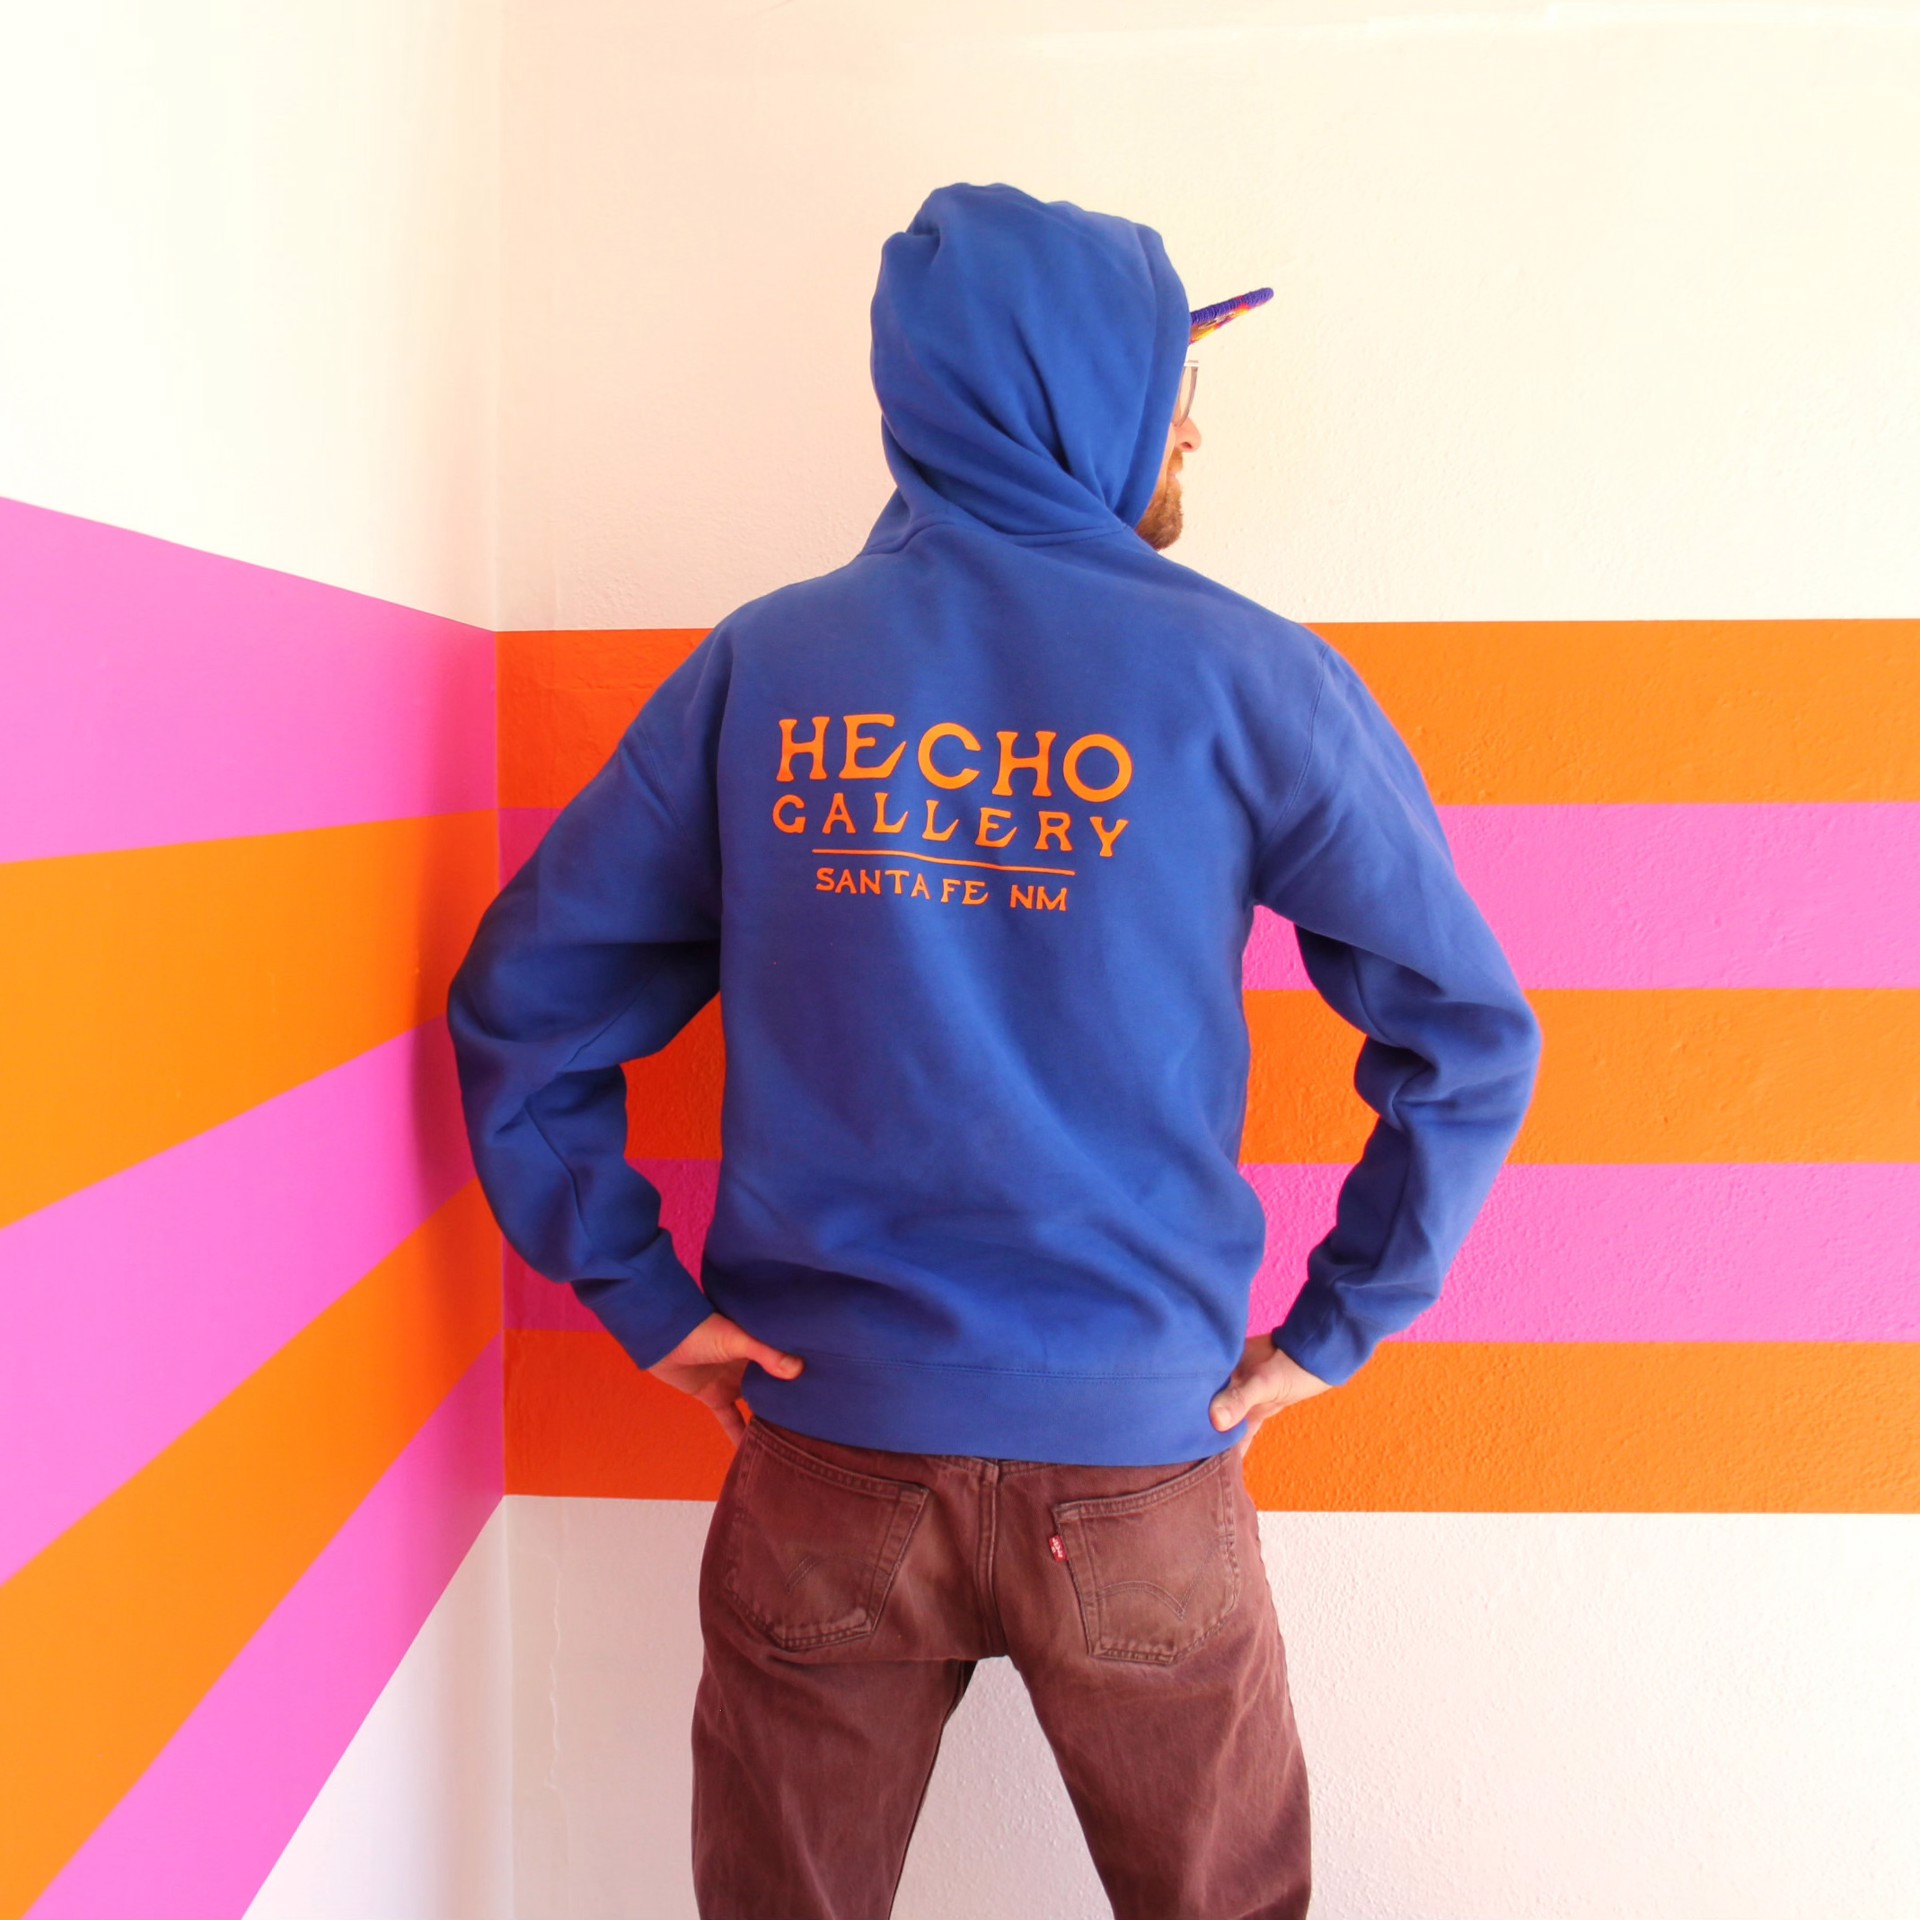 Hecho Gallery Hoodie by Hecho a Mano